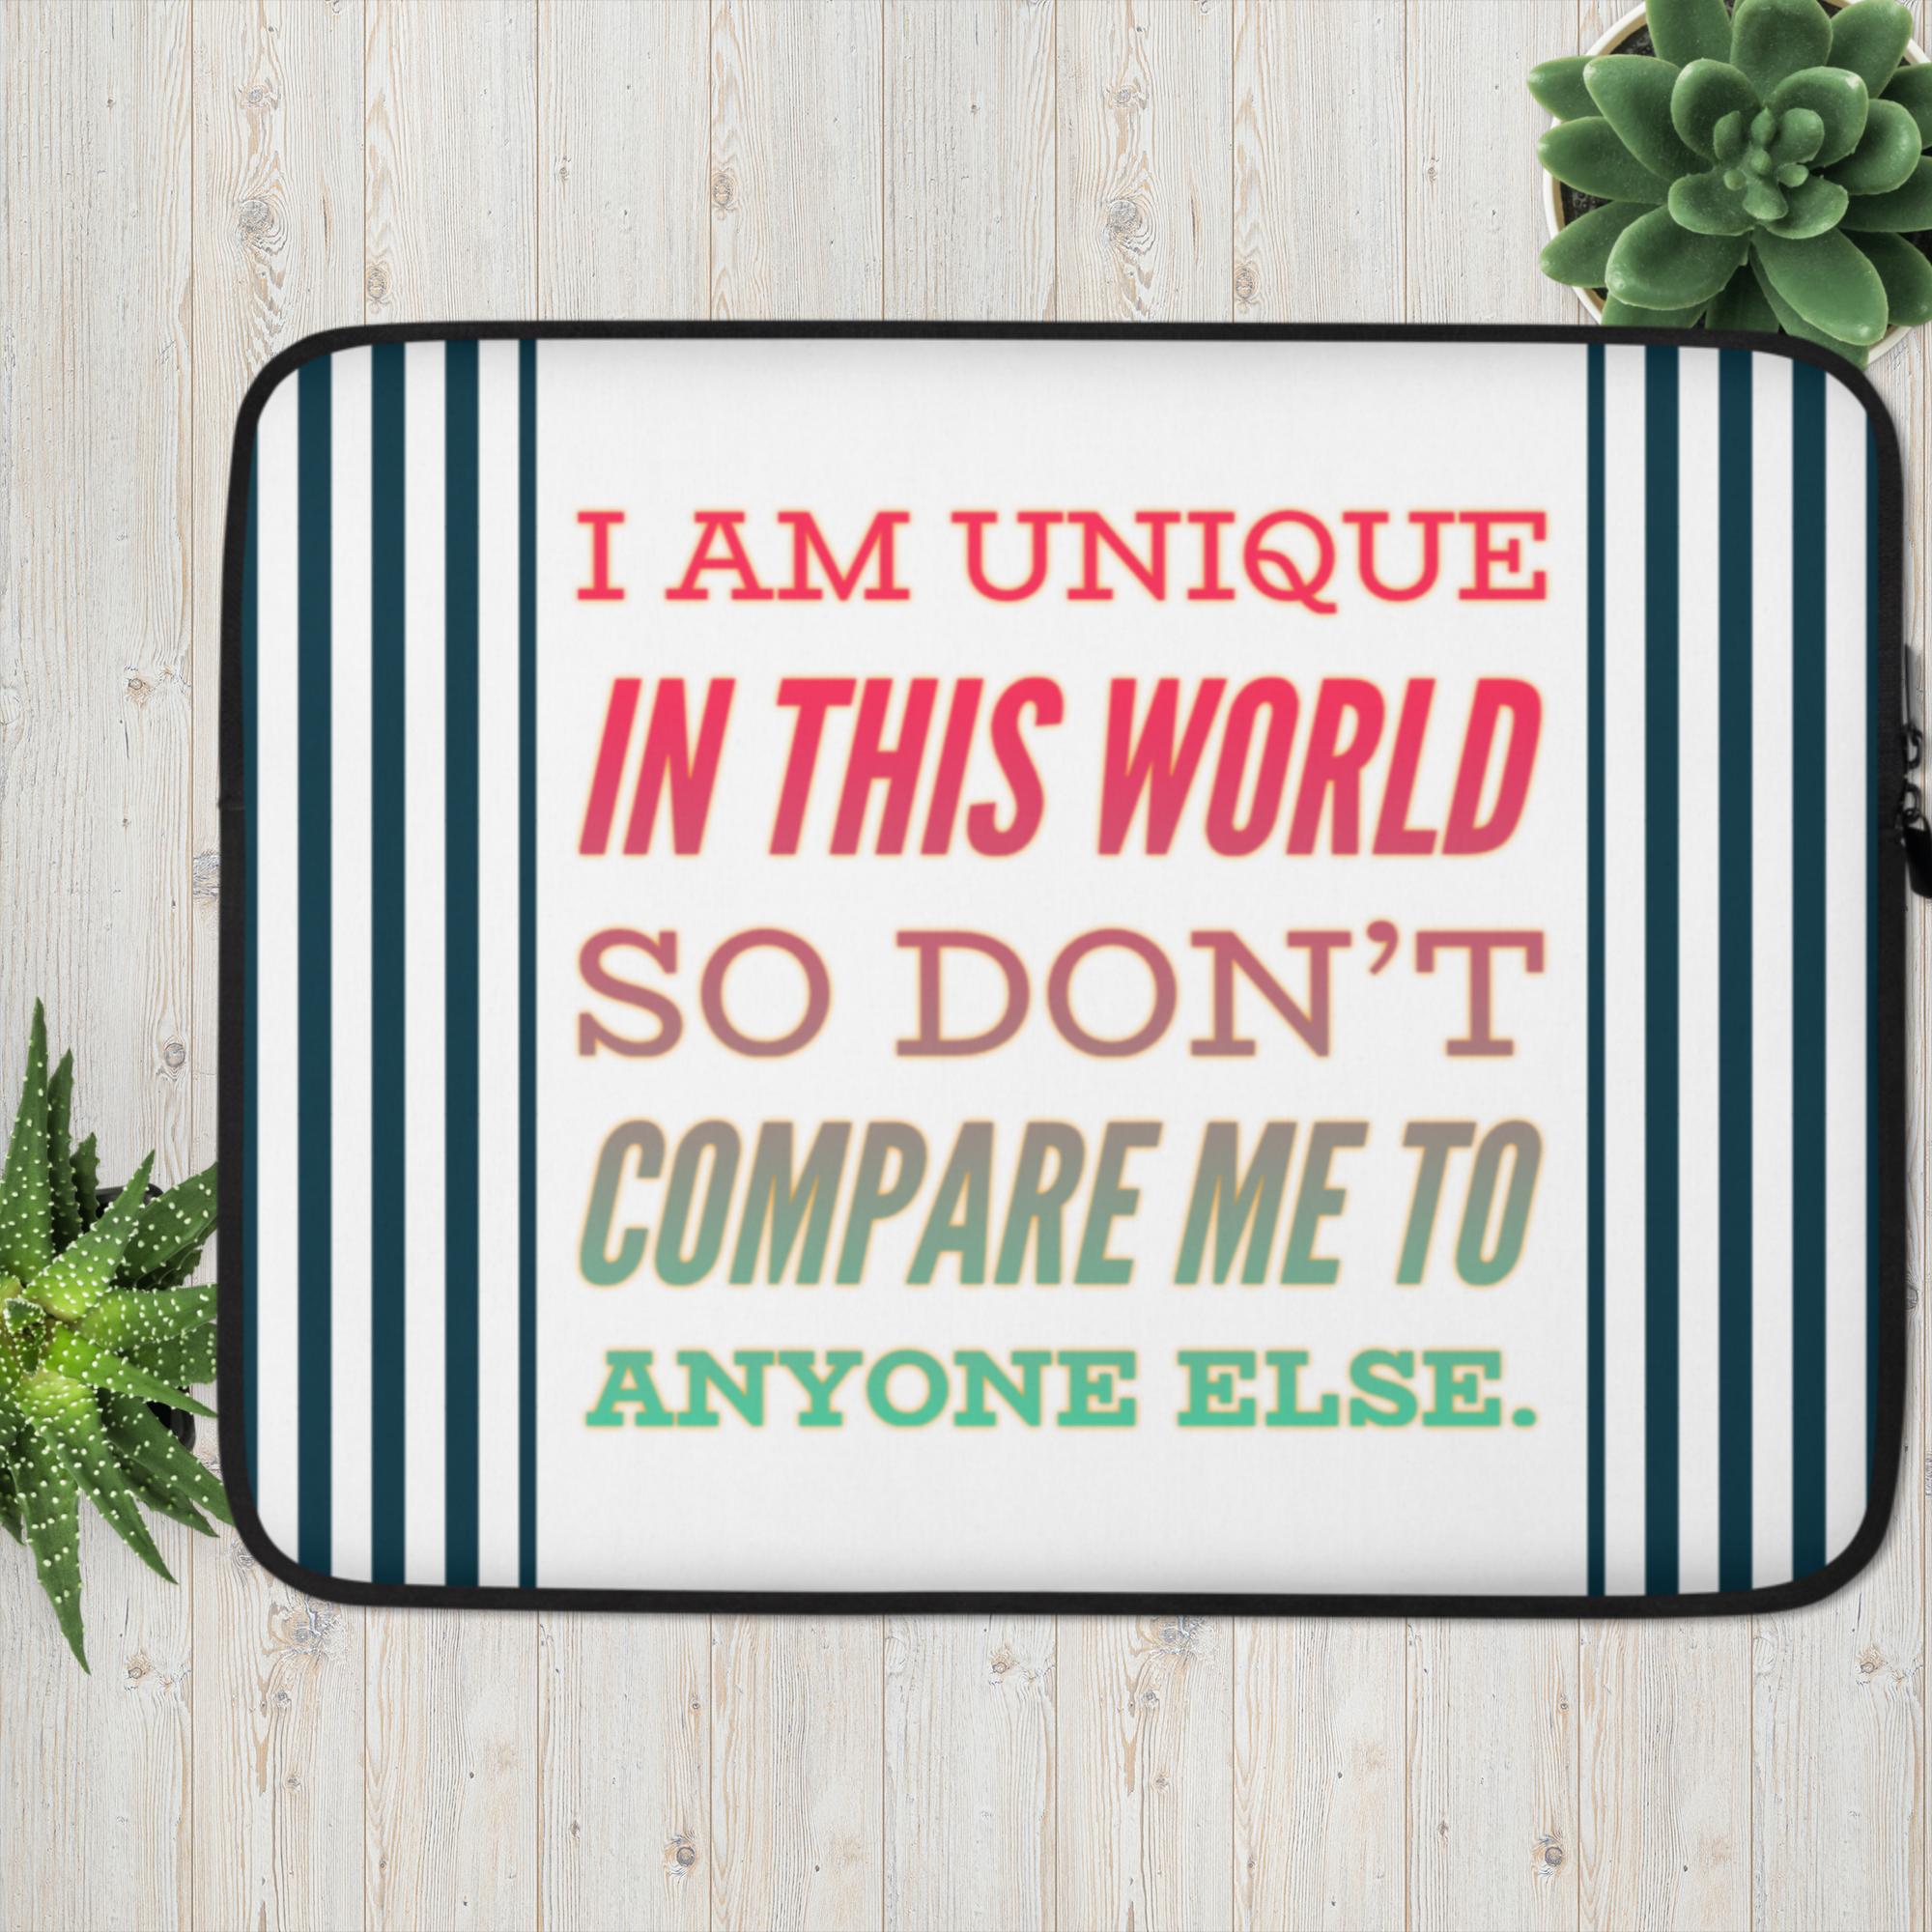 GloWell Designs - Laptop Sleeve - Affirmation Quote - I Am Unique - GloWell Designs